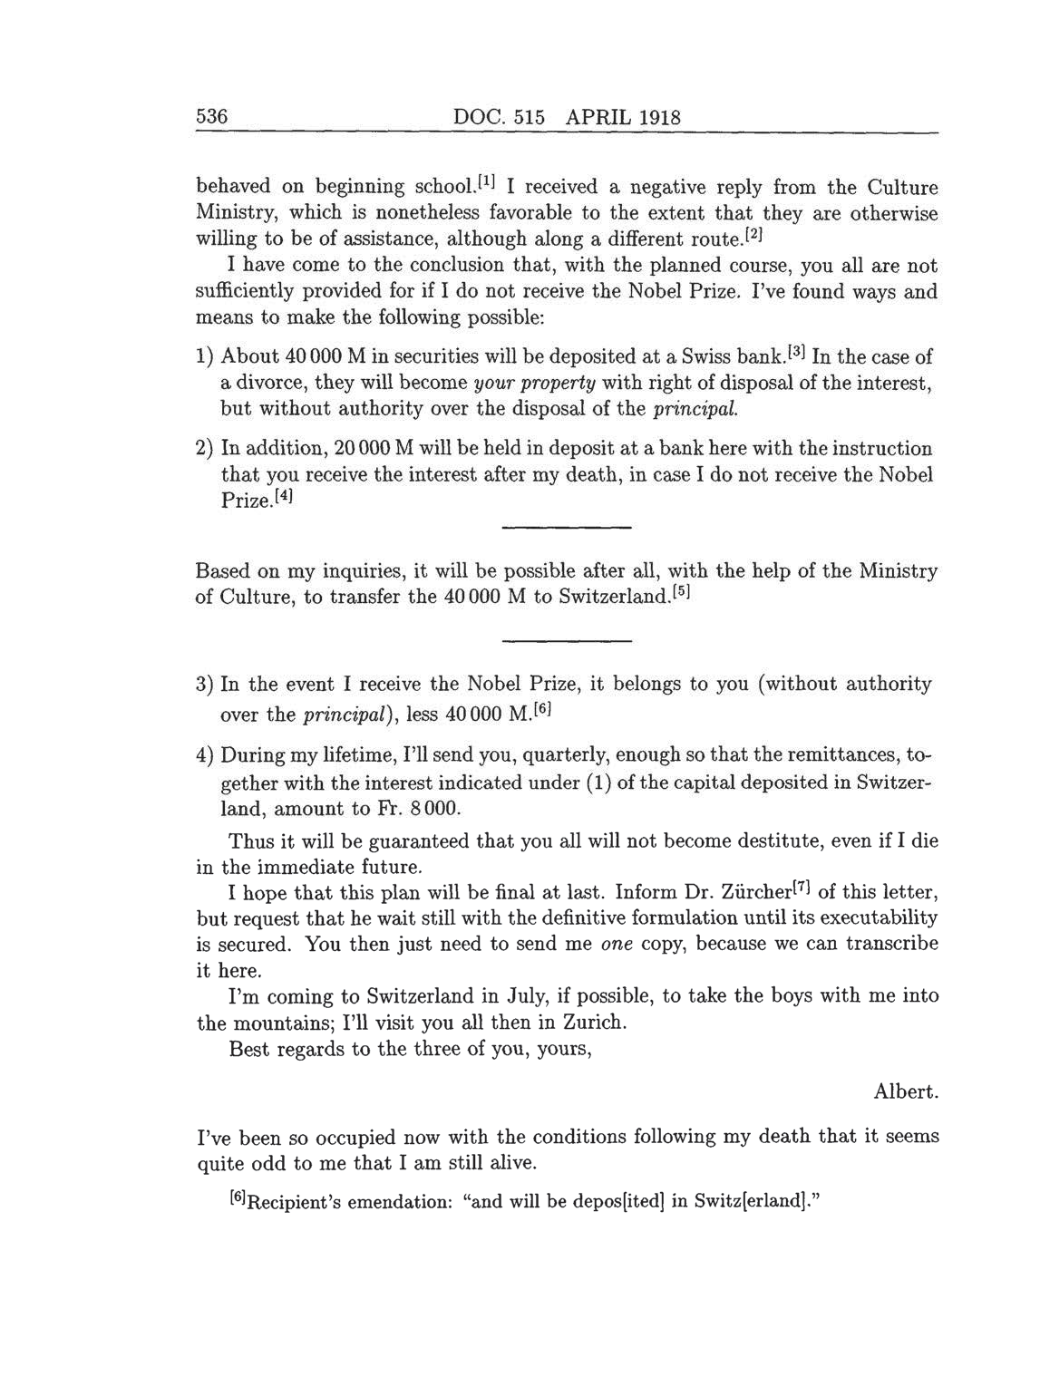 Volume 8: The Berlin Years: Correspondence, 1914-1918 (English translation supplement) page 536